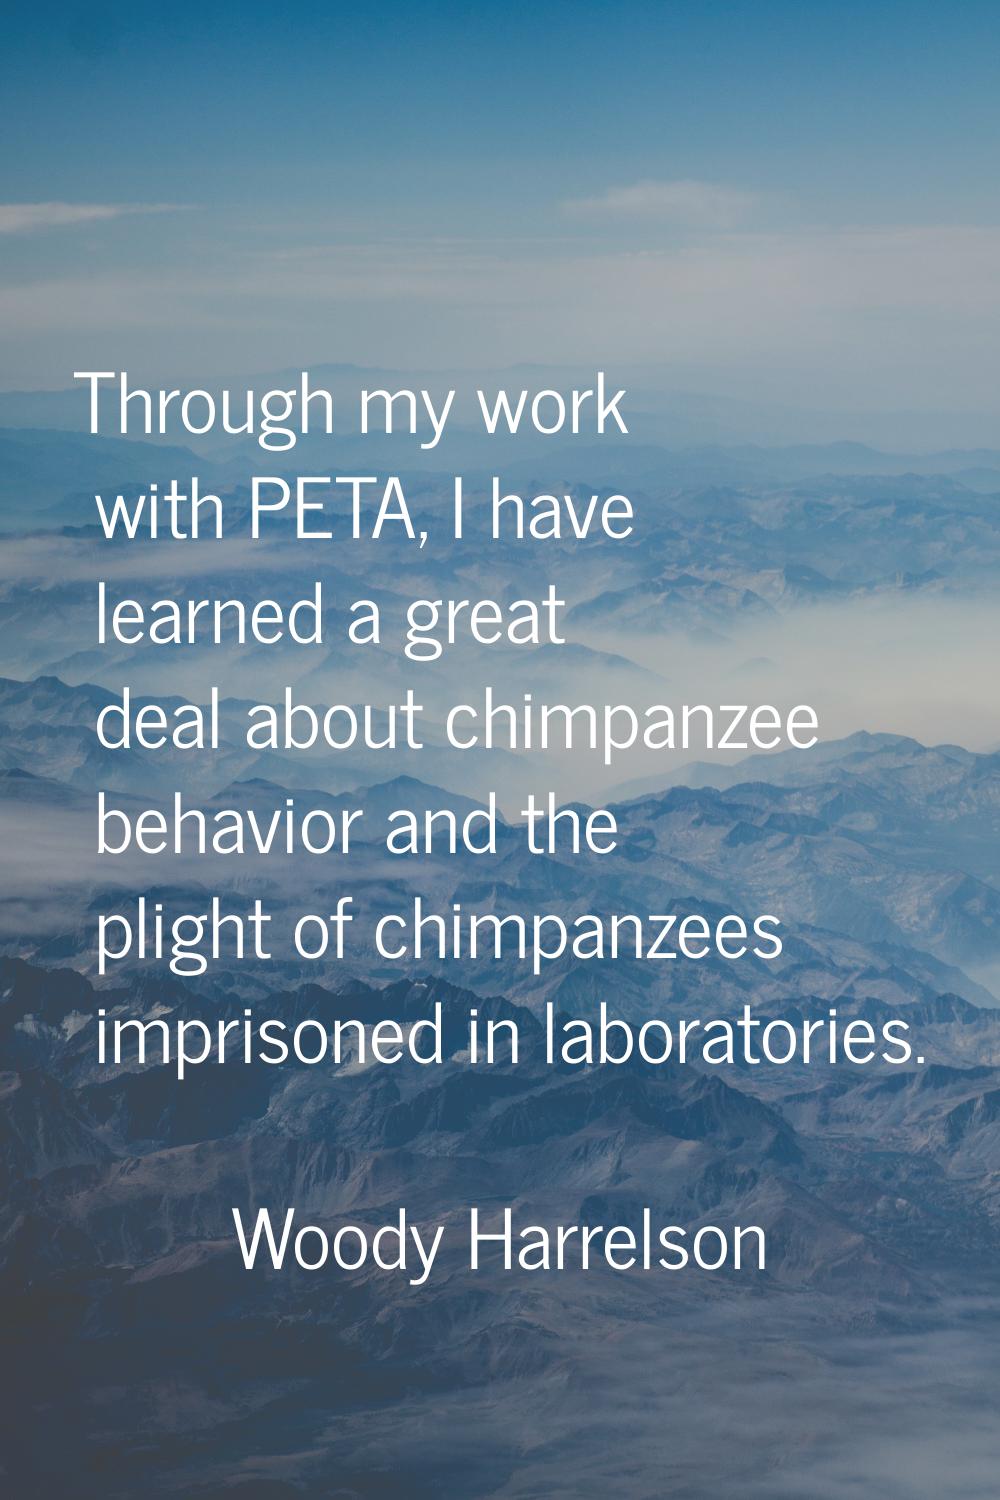 Through my work with PETA, I have learned a great deal about chimpanzee behavior and the plight of 